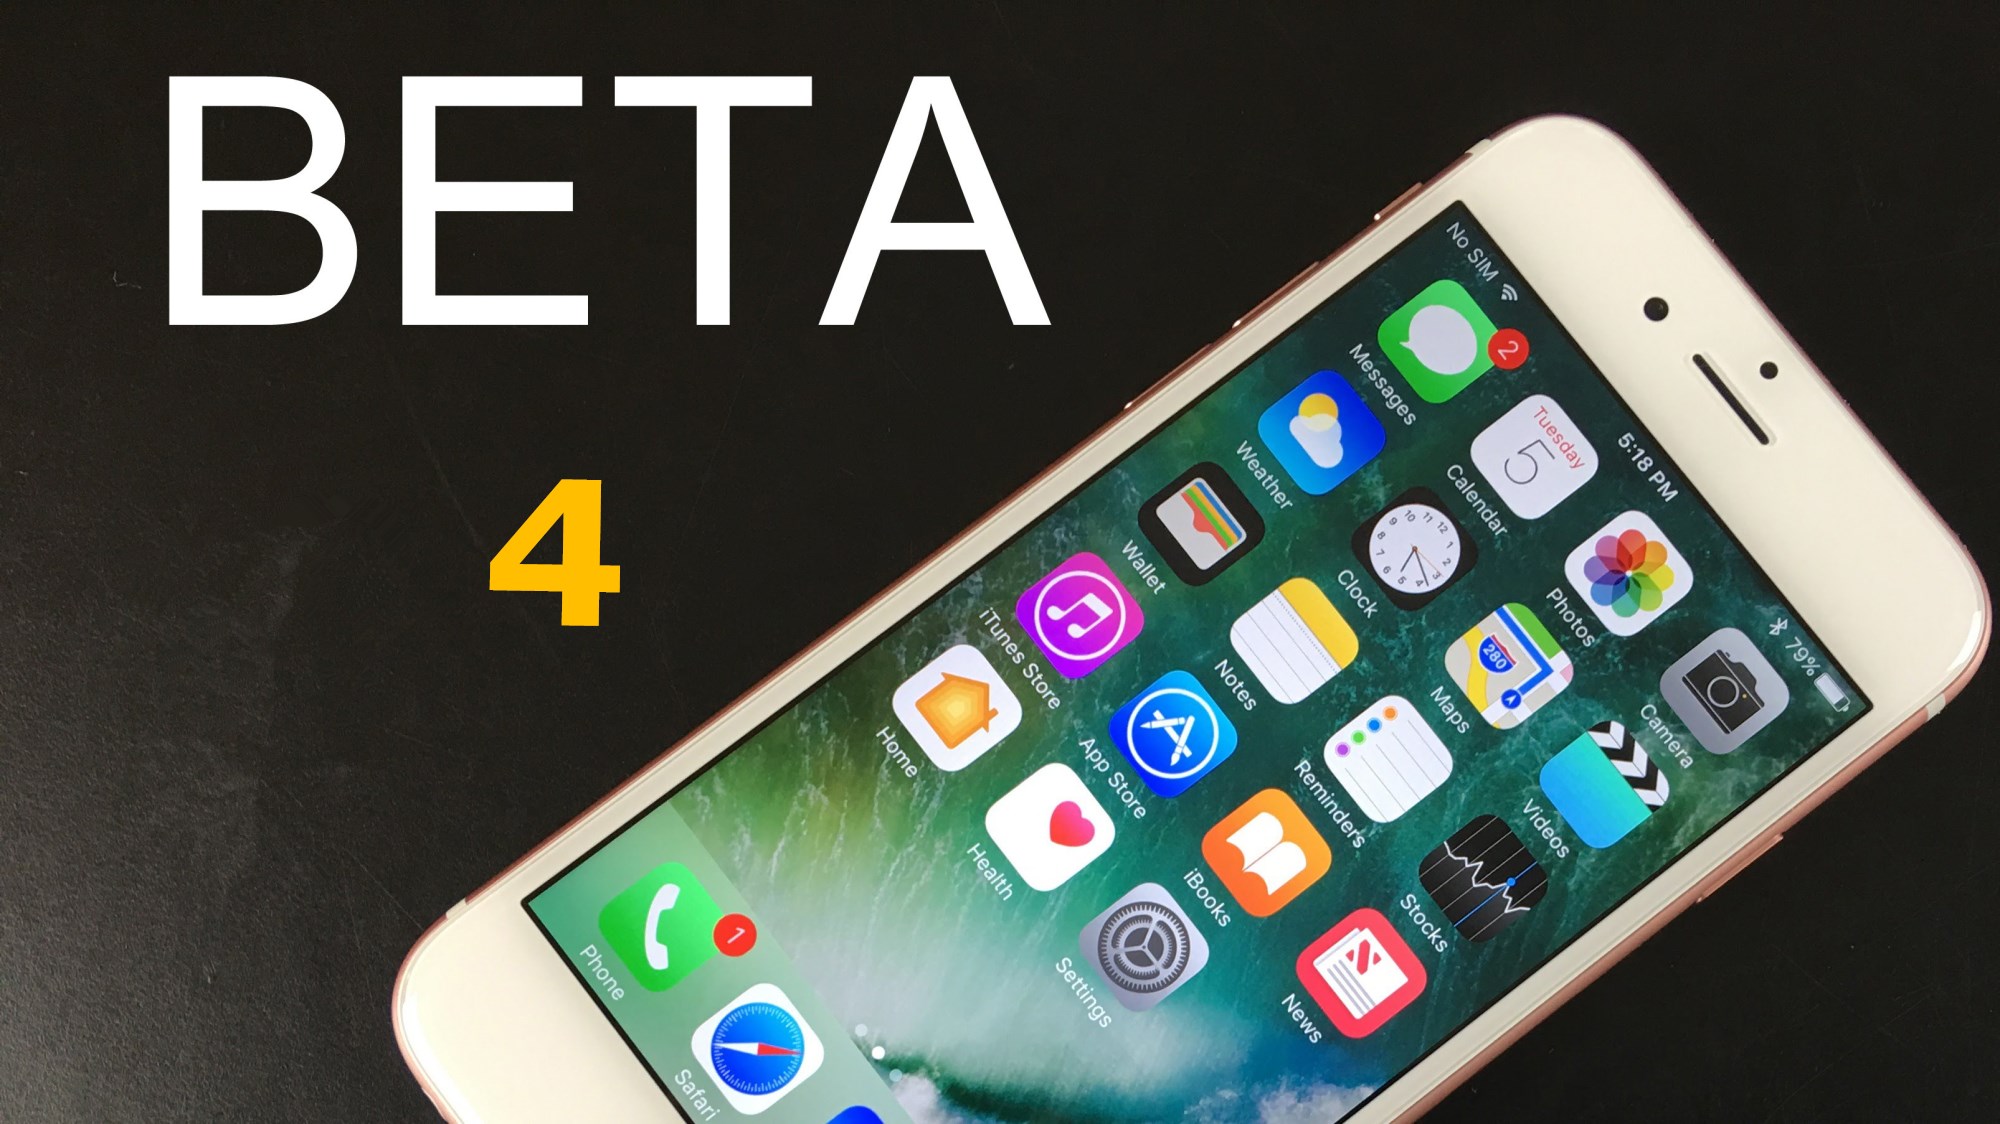 How To Update iPhone To iOS 10.3 Beta 4 Using 3uTools?